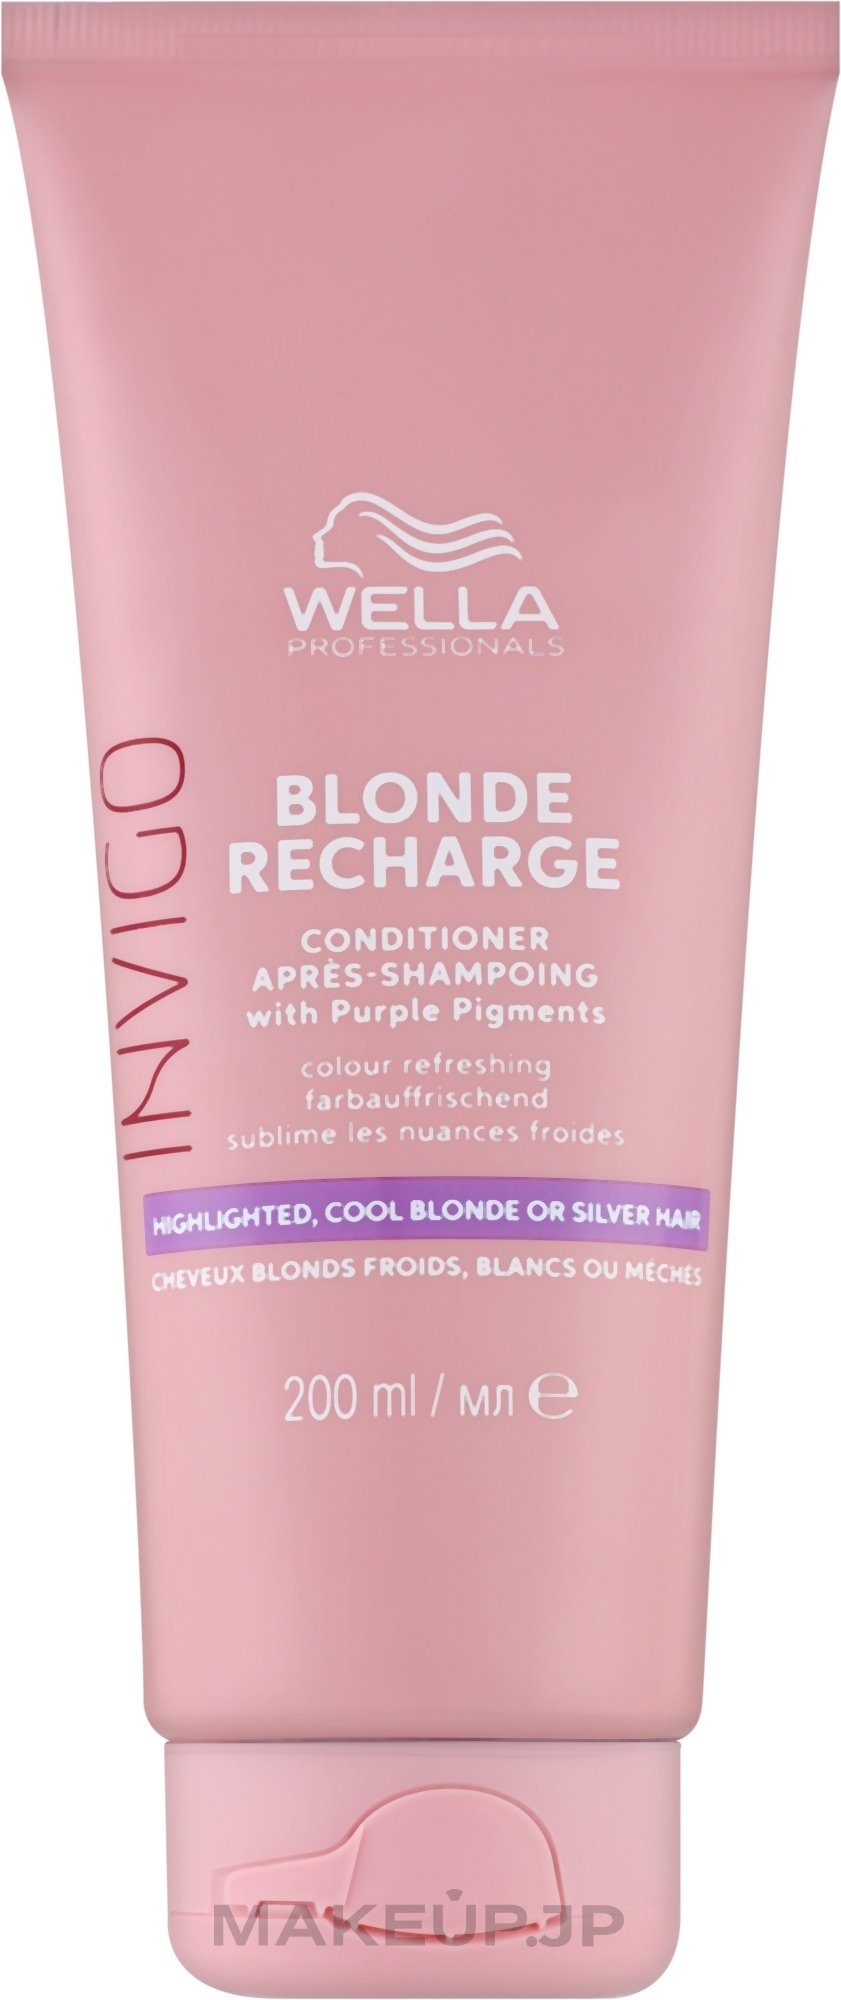 Conditioner for Highlighted & Cold Blonde Hair - Wella Professionals Invigo Blonde Recharge Color Refreshing Highlighted, Cool Blonde or Silver Hair Conditioner — photo 200 ml